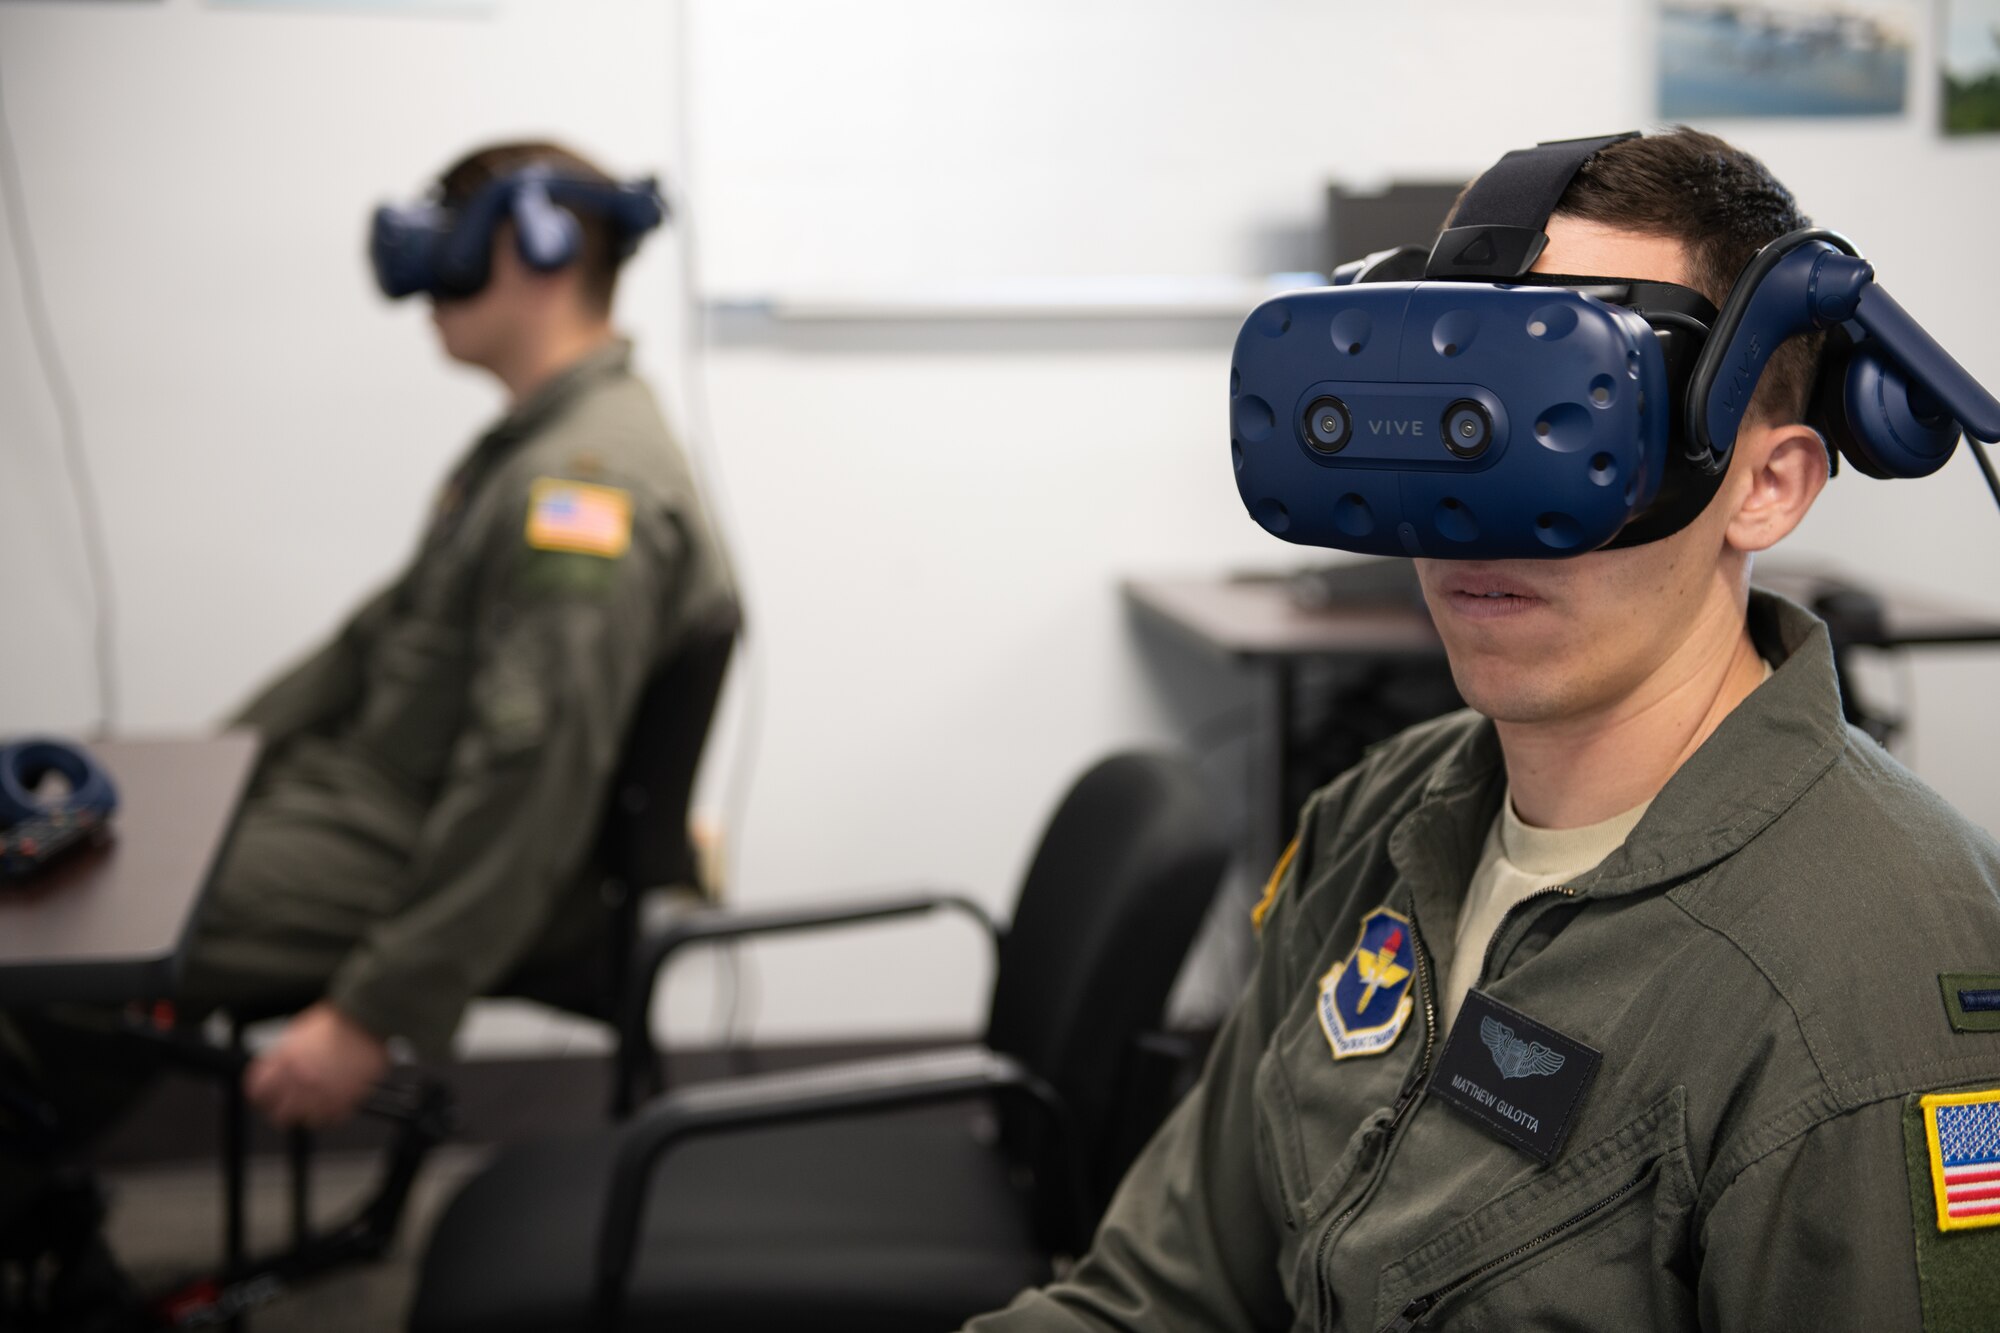 23rd Flying Training Squadron revolutionizes the way pilots are trained